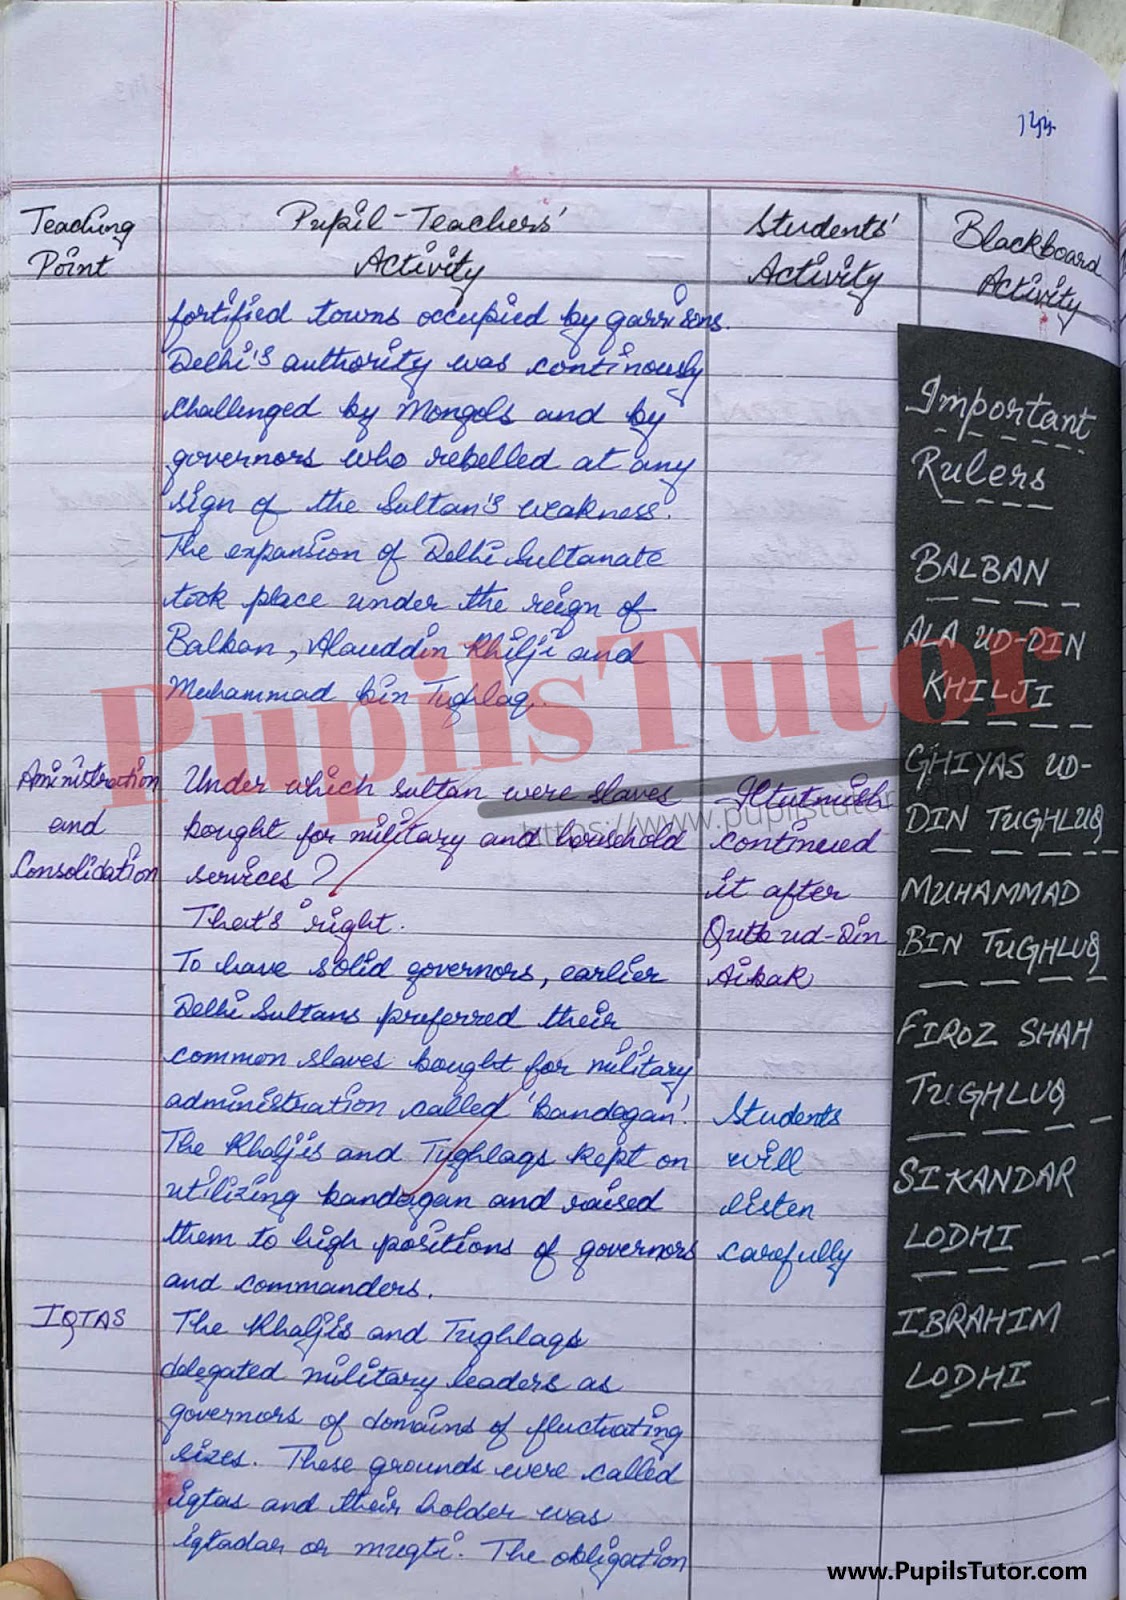 How To Make Social Science Lesson Plan For Class 11 On Delhi Sultanate Rulers In English – [Page And Photo 4] – pupilstutor.com